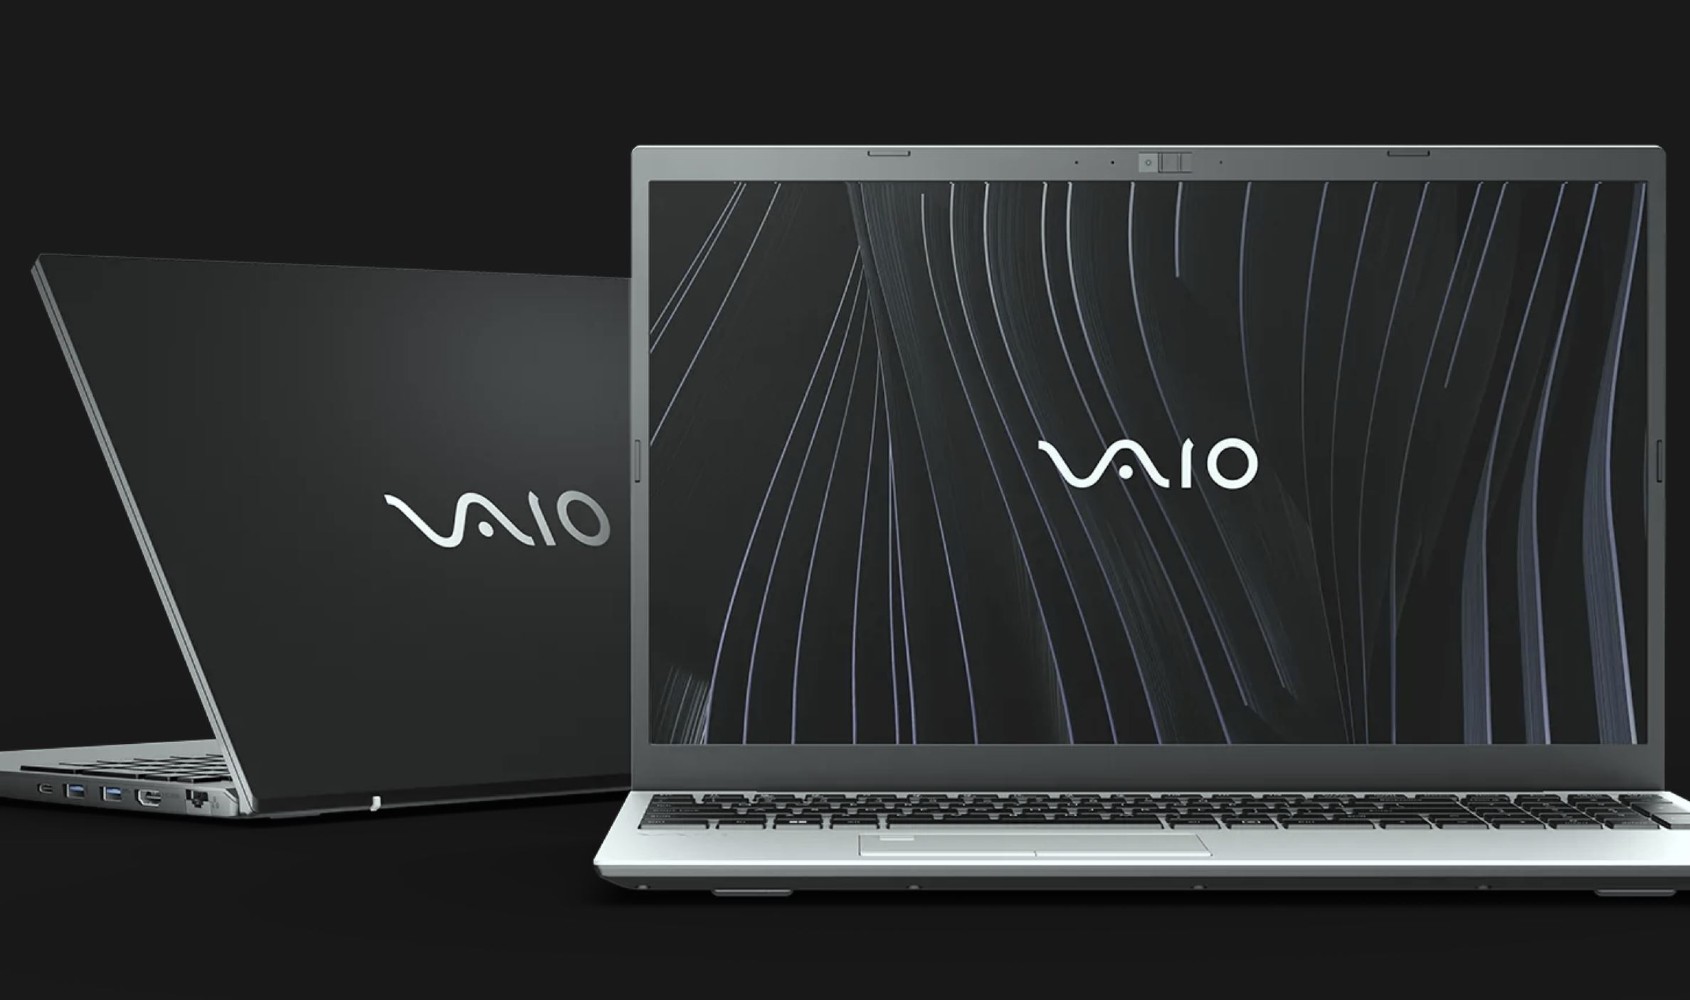 Vaio laptops are back, and they're surprisingly affordable